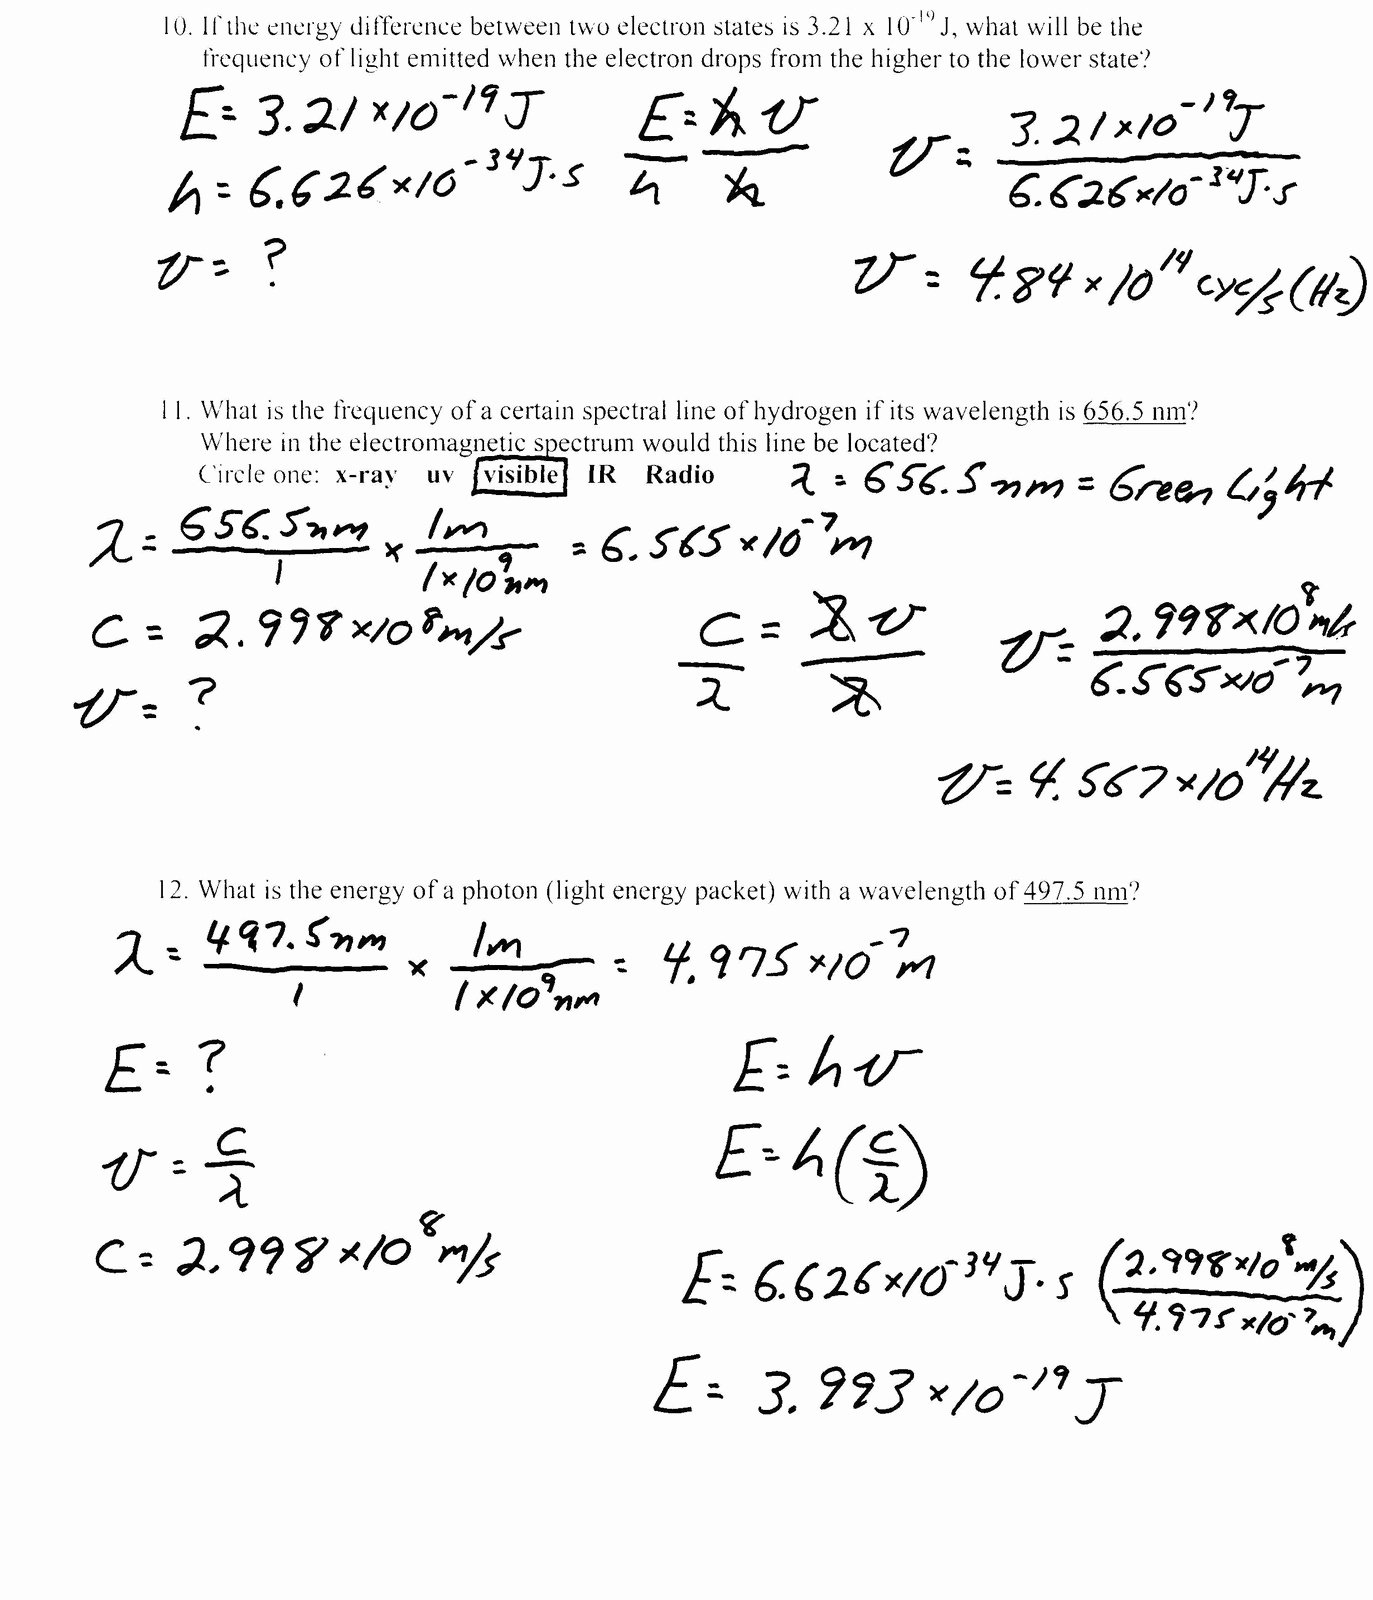 Bohr atomic Models Worksheet Answers Lovely Heritage High School Honors Physical Science Light